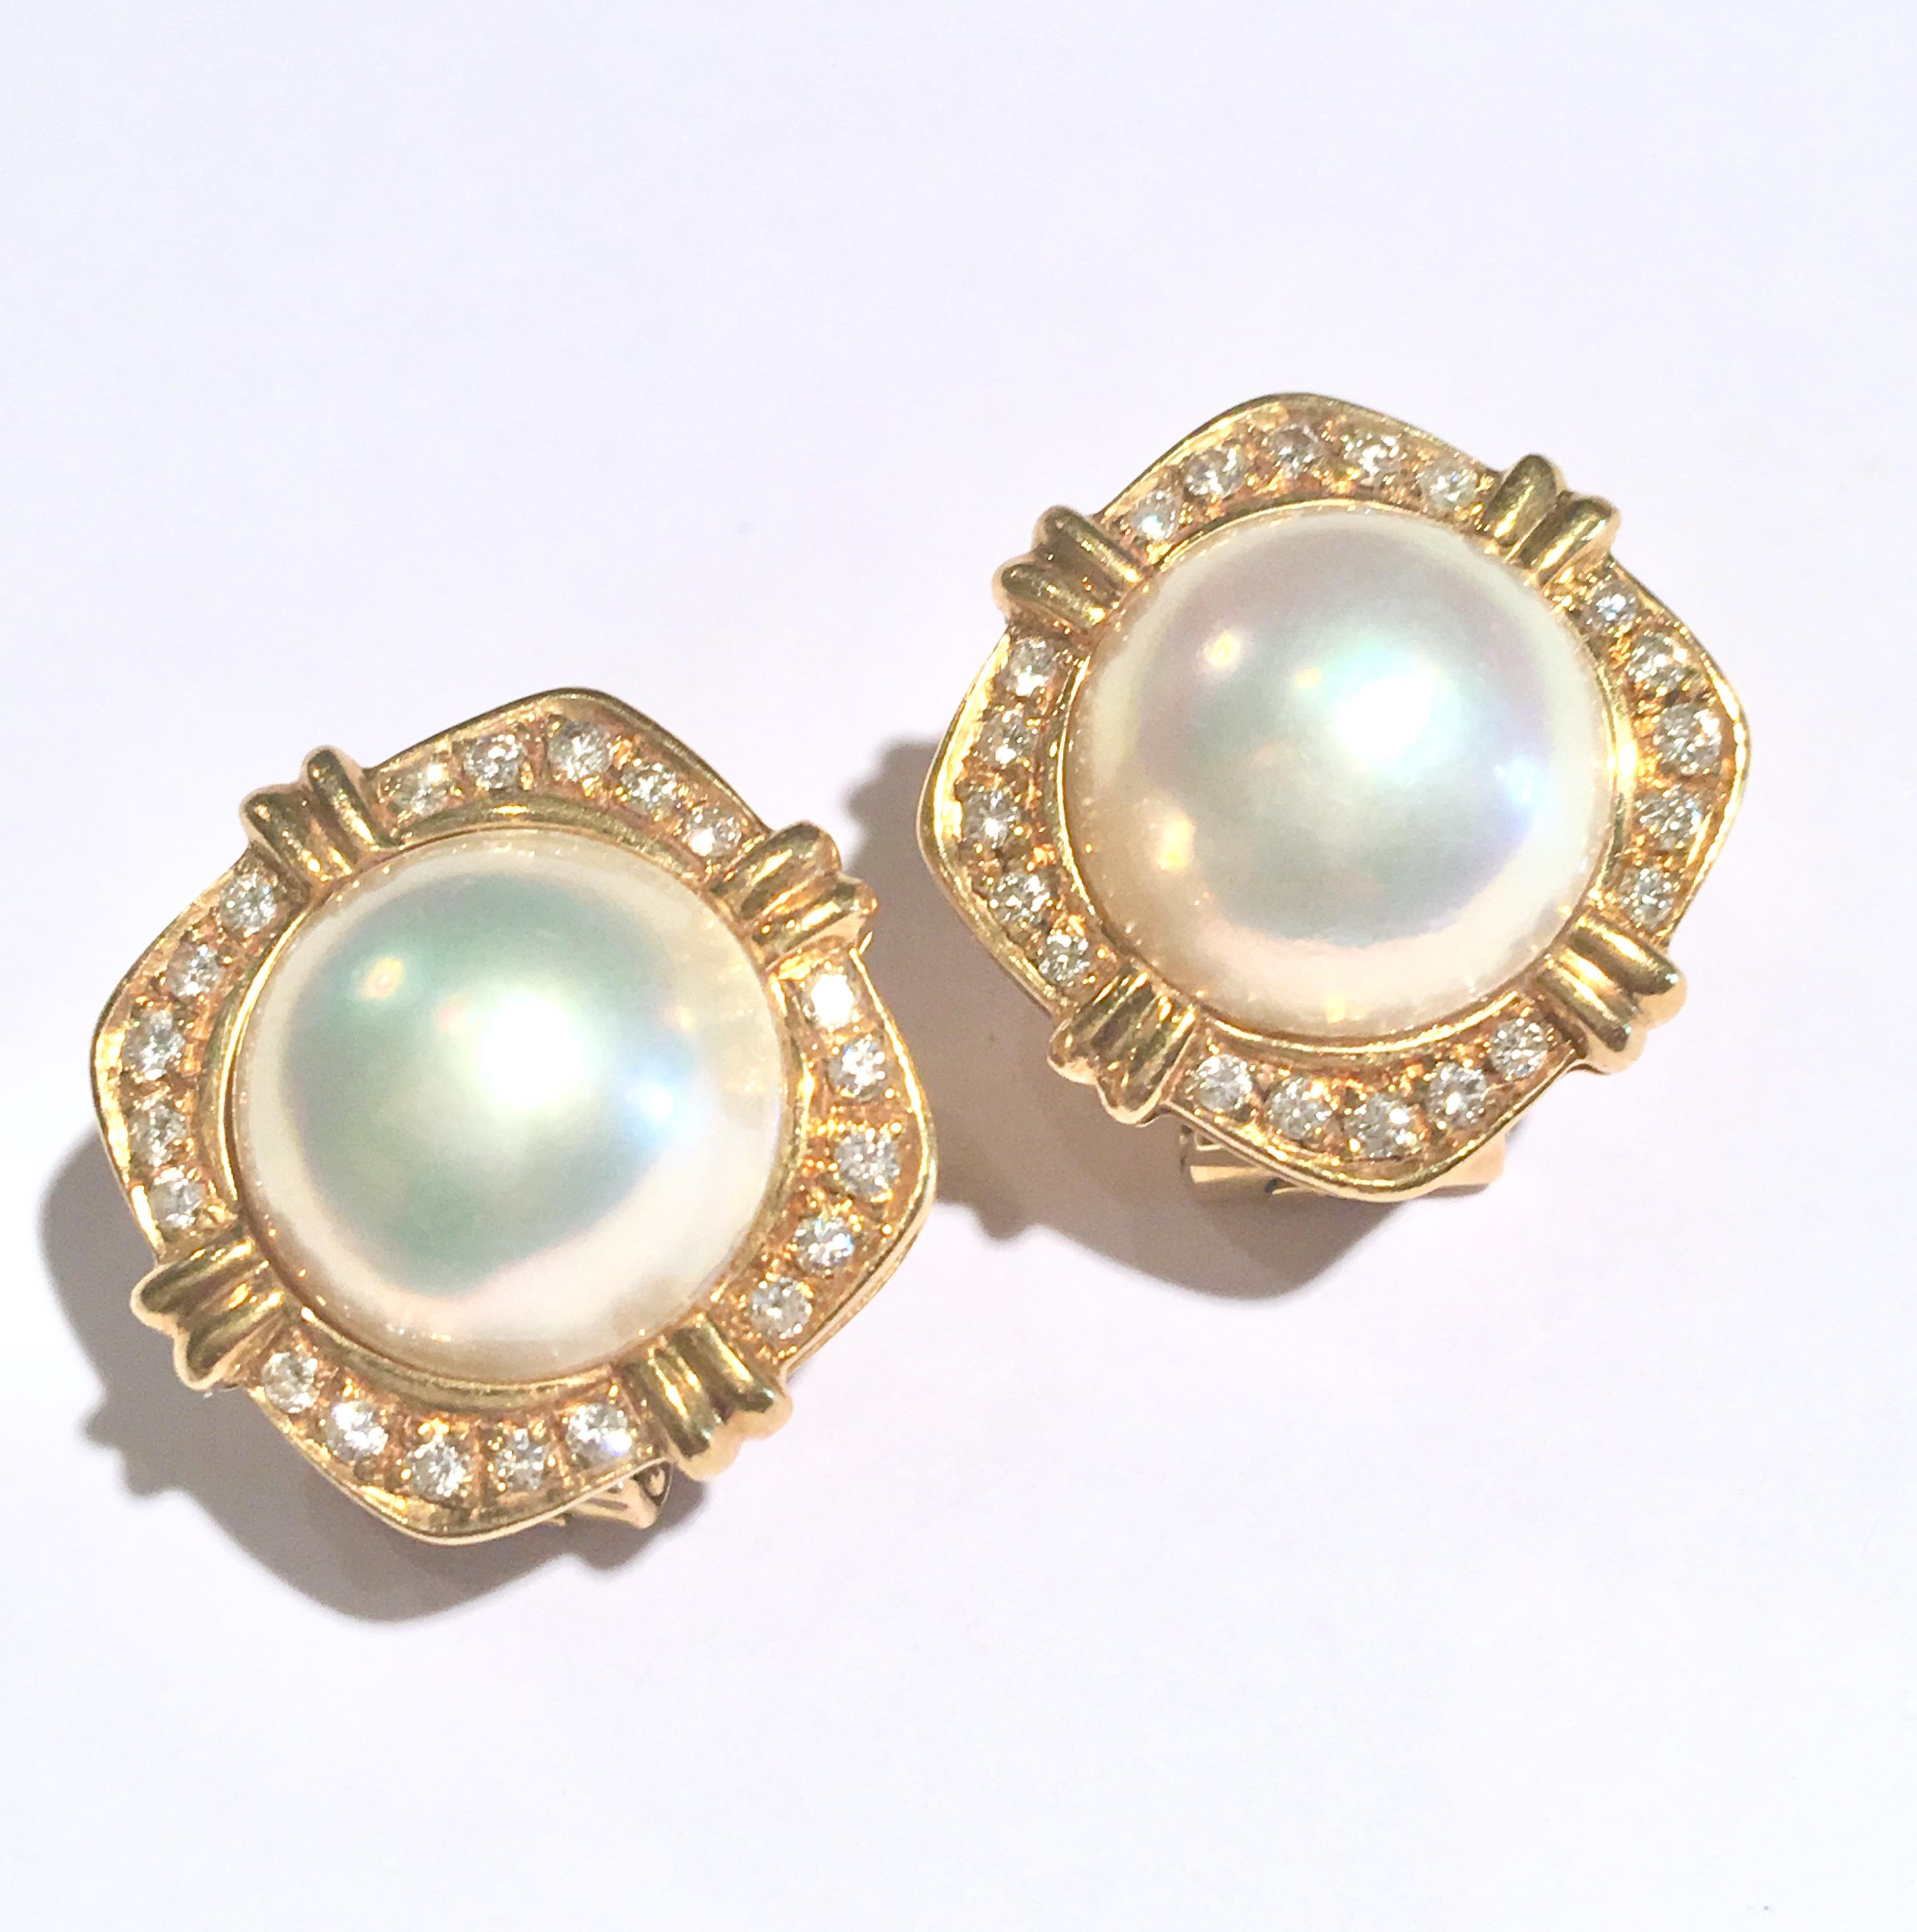 Fine and gorgeous pair of 18k yellow gold earrings, featuring white and shiny mabe pearls. 

Each pearl are surrounded by 20 diamonds on a diamond-shaped yellow gold frame.

Diamonds weight: 0.40 carats

Very elegant!

18K yellow gold, Owl stamp